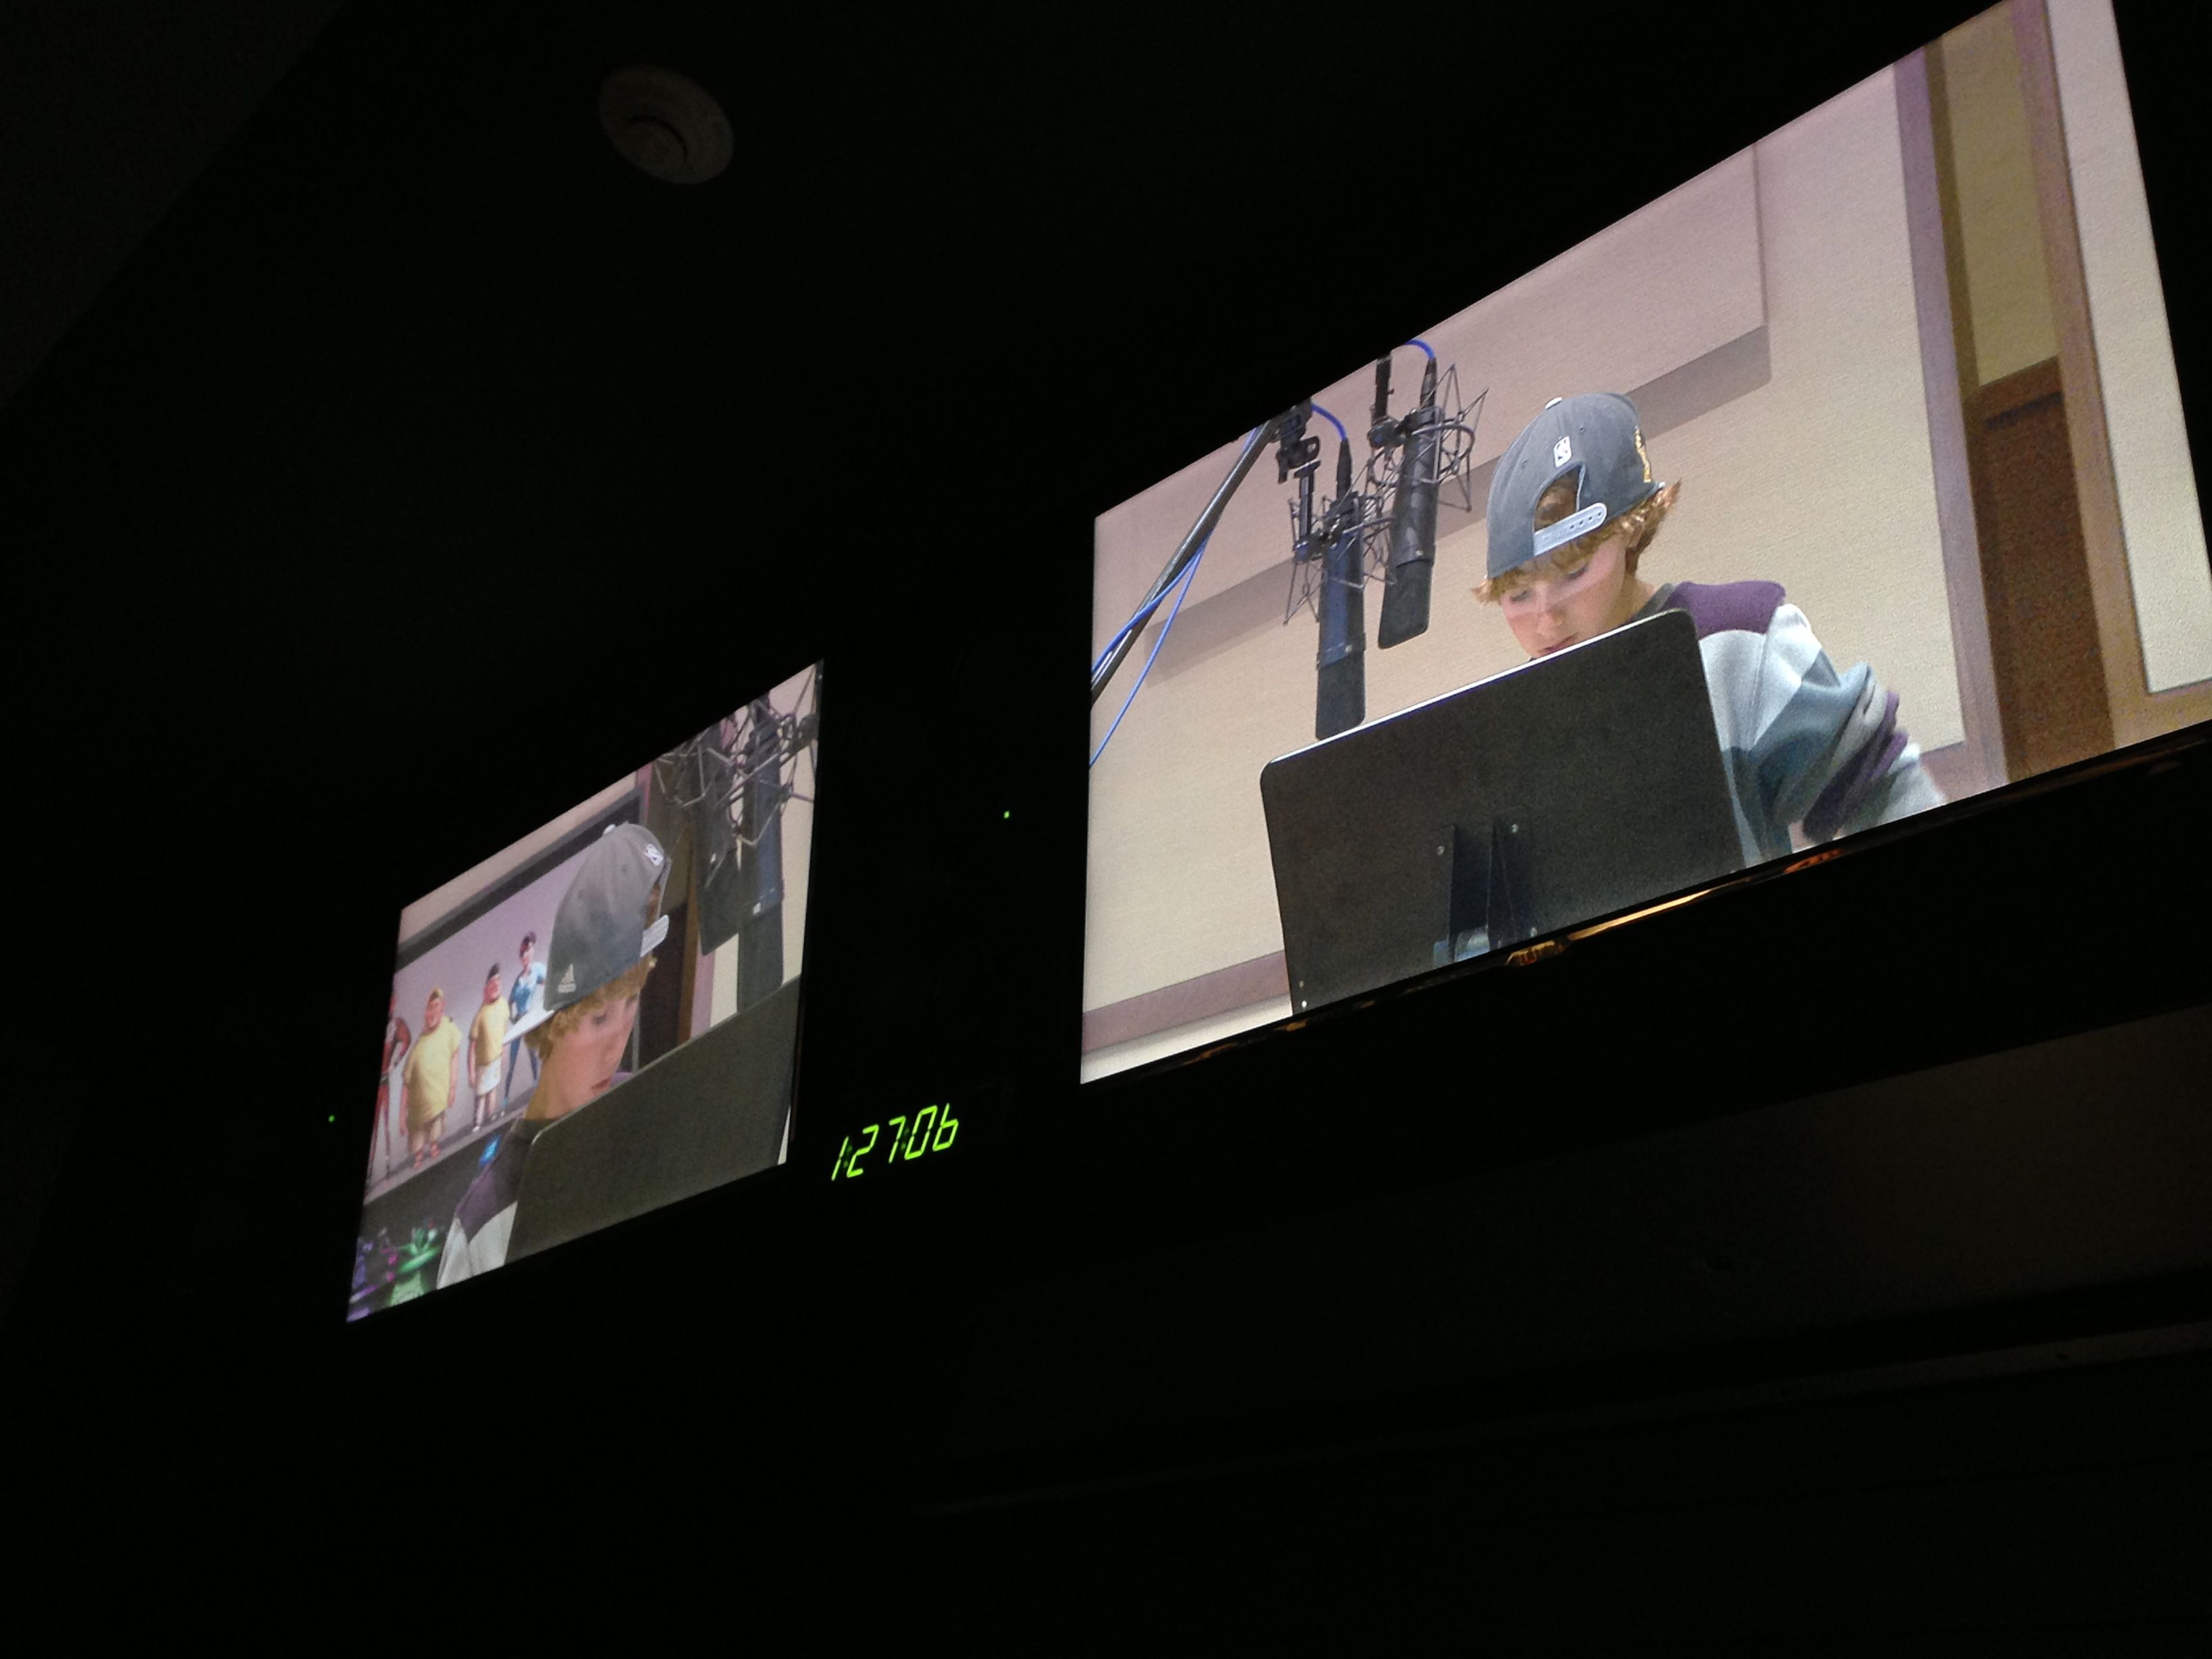 In Sound booth taping of 